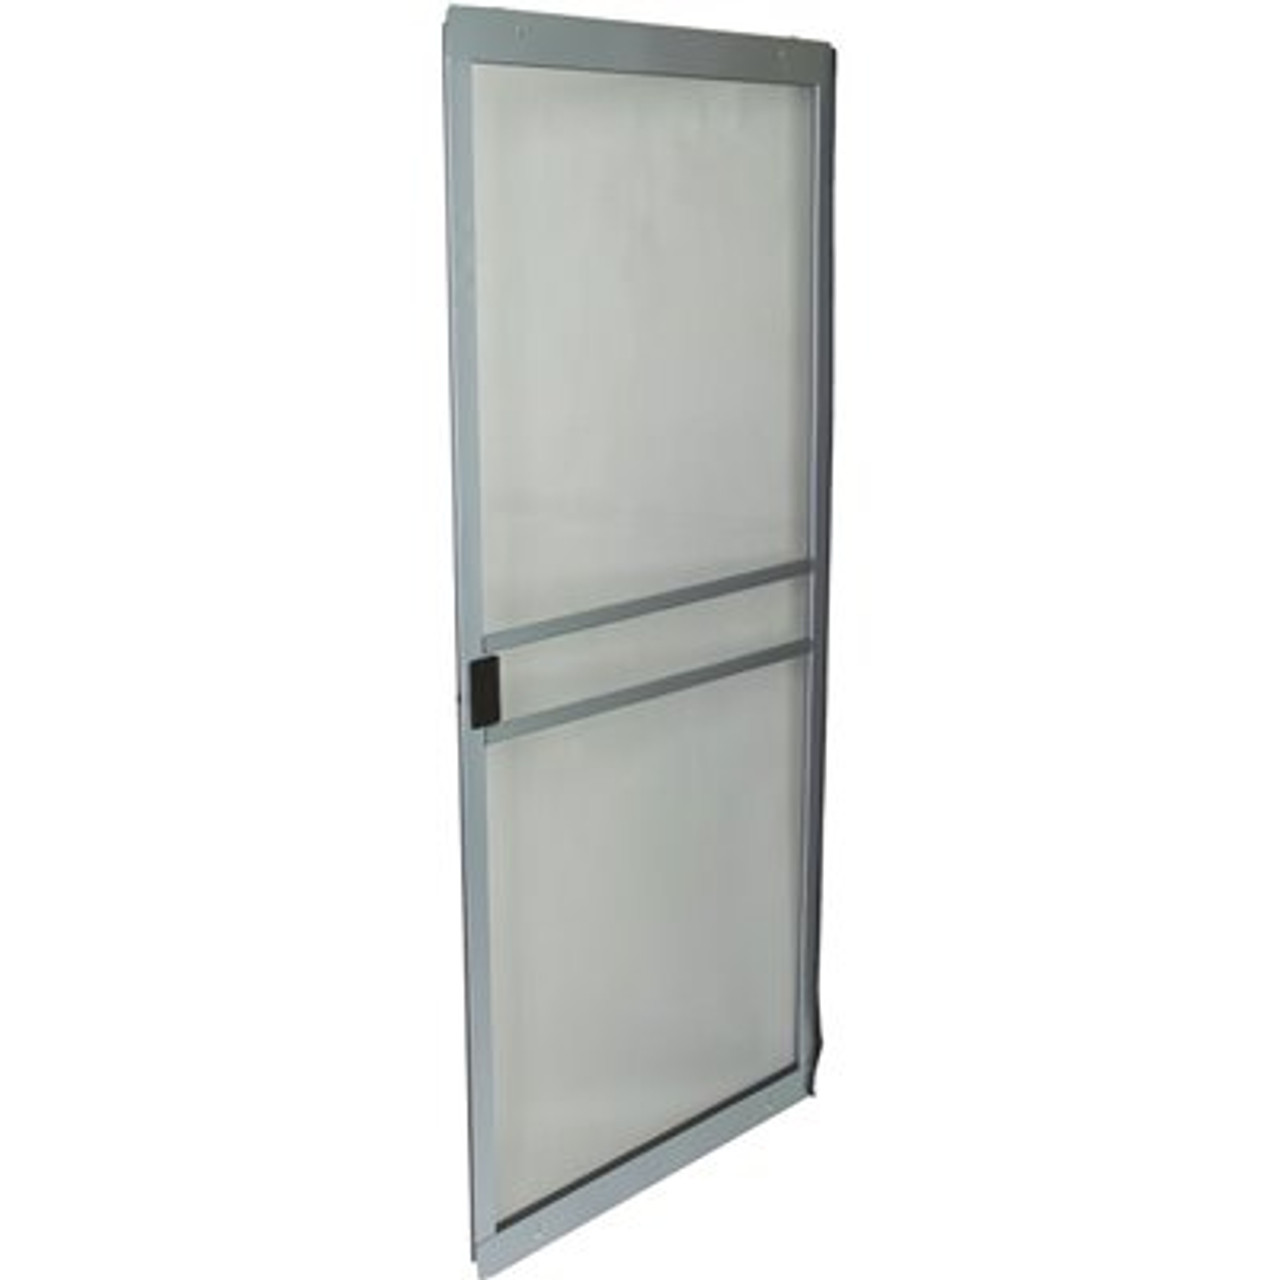 PRIVATE BRAND UNBRANDED 48" x 78-80" Sliding Screen Door Gray, Package of 5